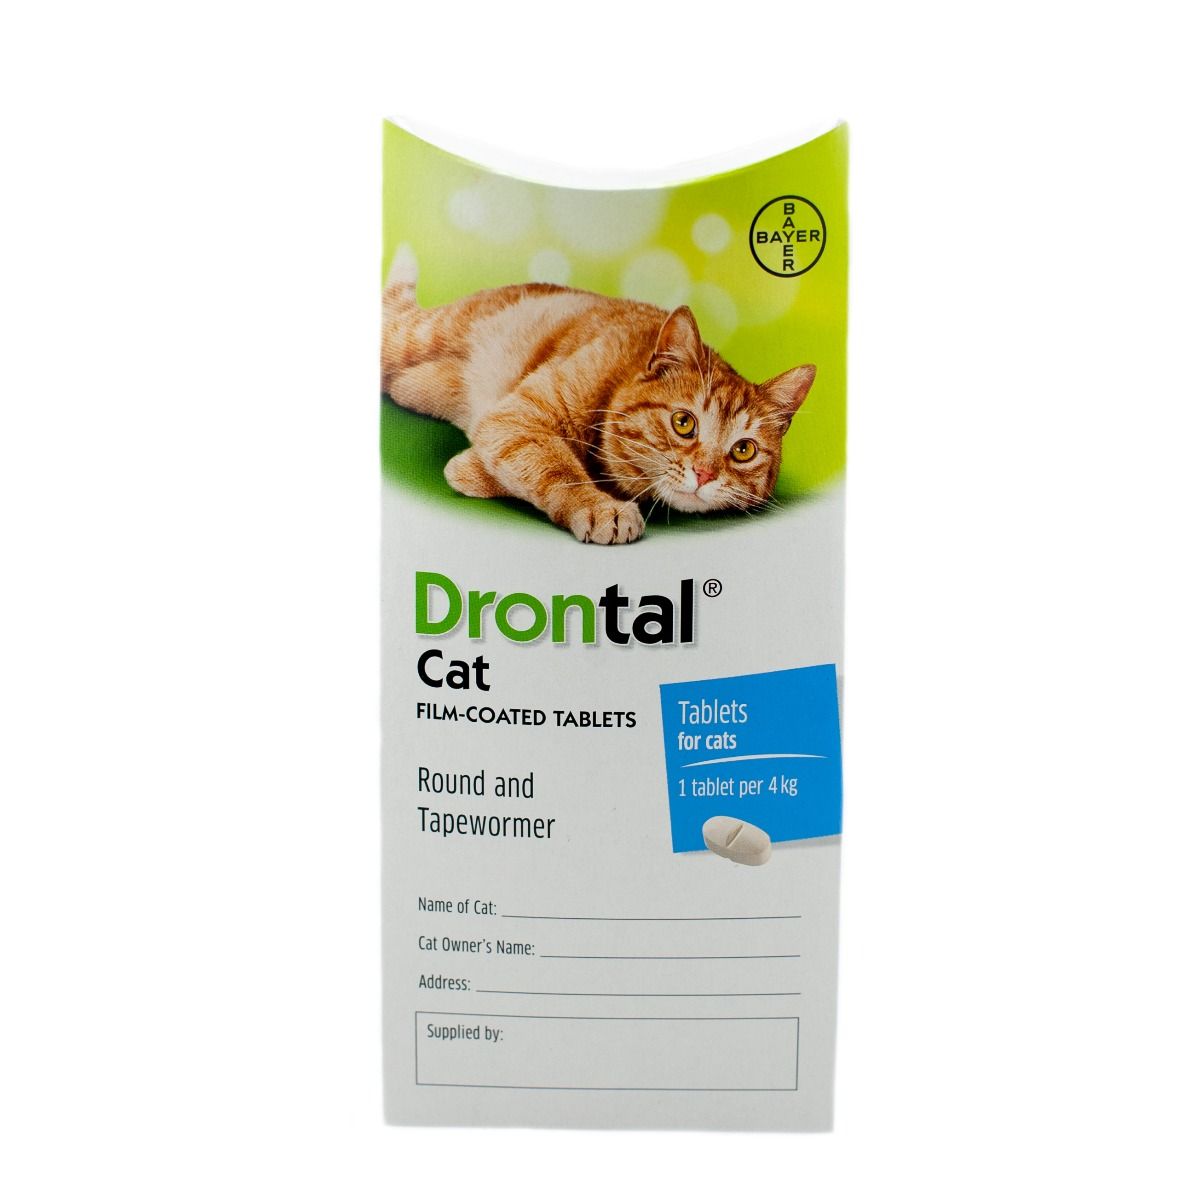 Droncit Spot On Vermifuges Chat 4 Tubes Traitement Chats Pipettes 0 5ml 20mg Fr Veterinari Pipette Animali